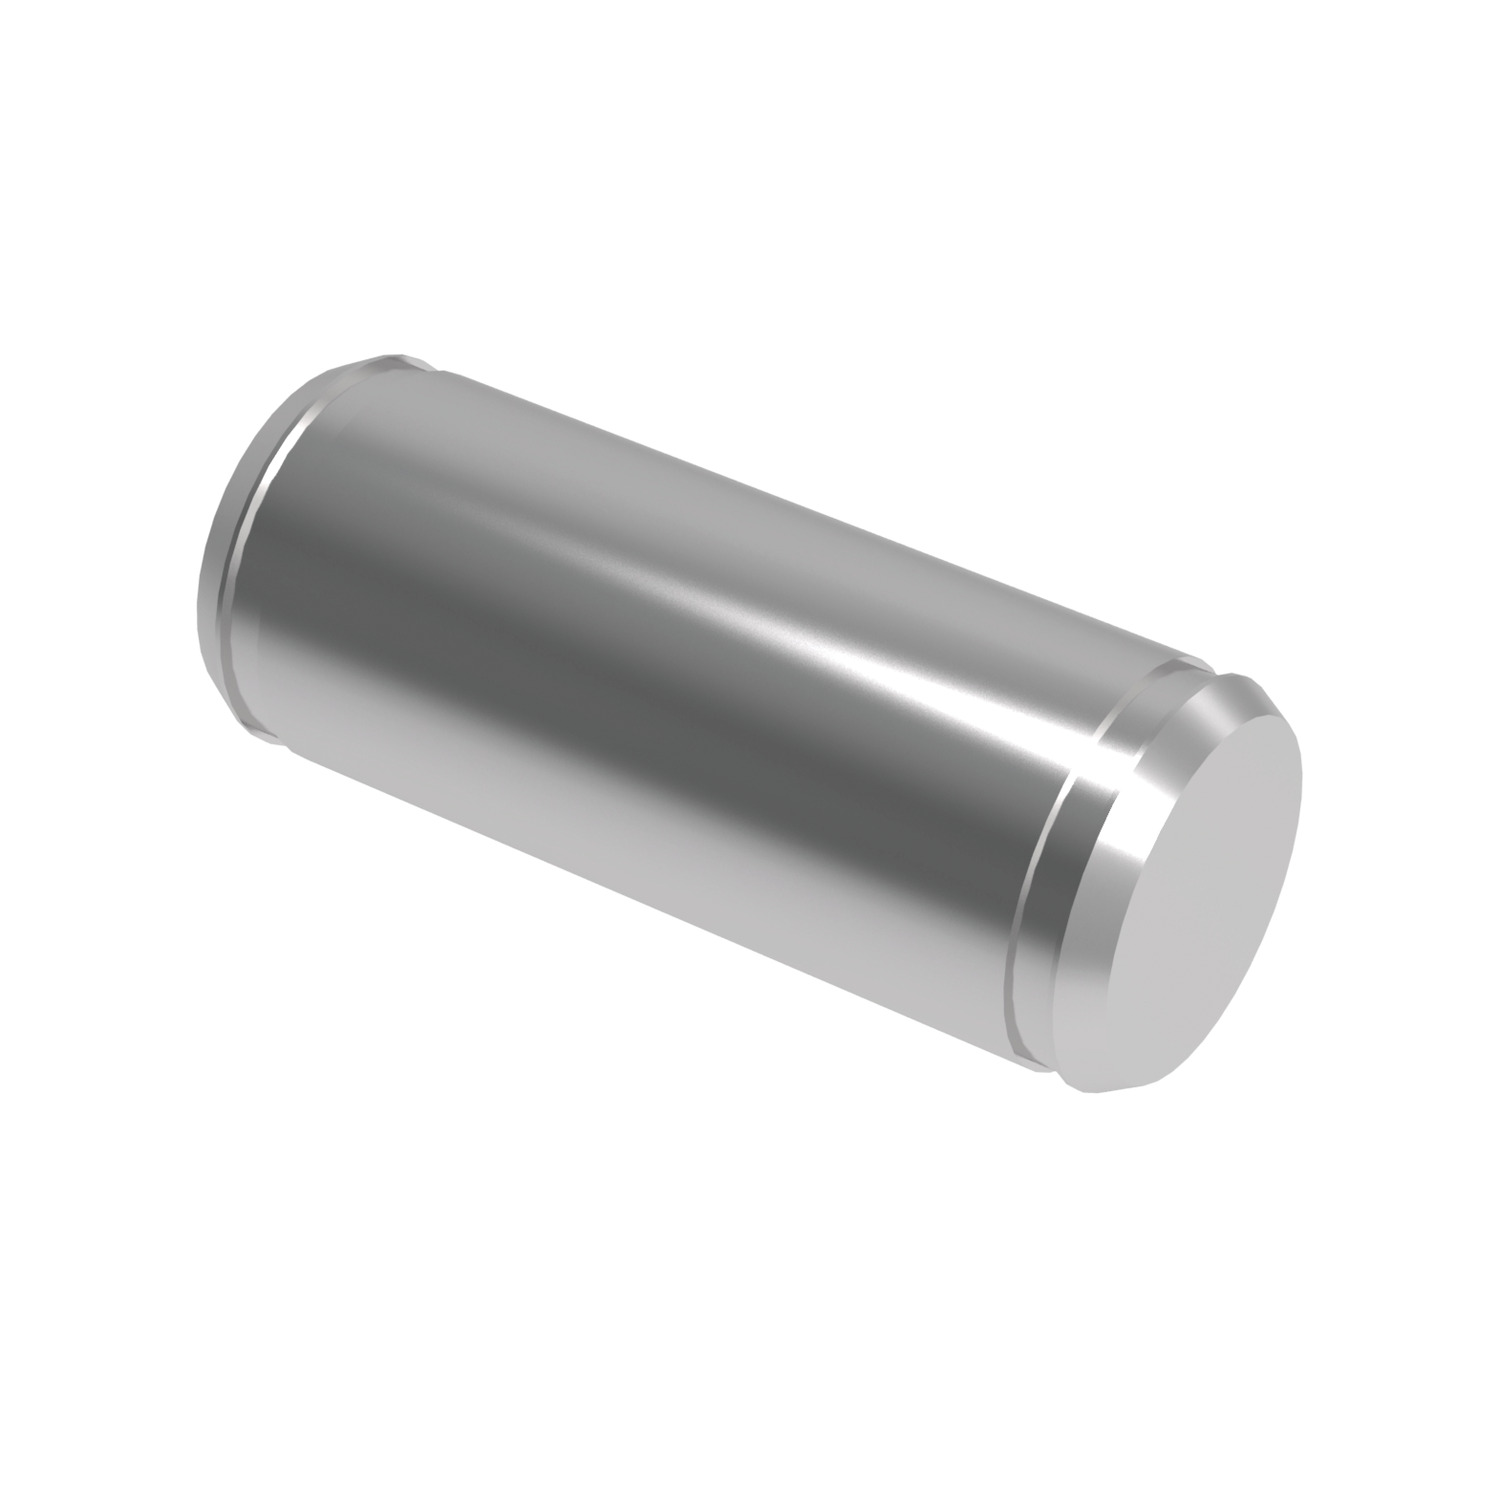 Stainless Clevis Pin Pins for clevis joints and circlips. Available in stainless steel, steel and plastic. Versions with or without pin heads available.